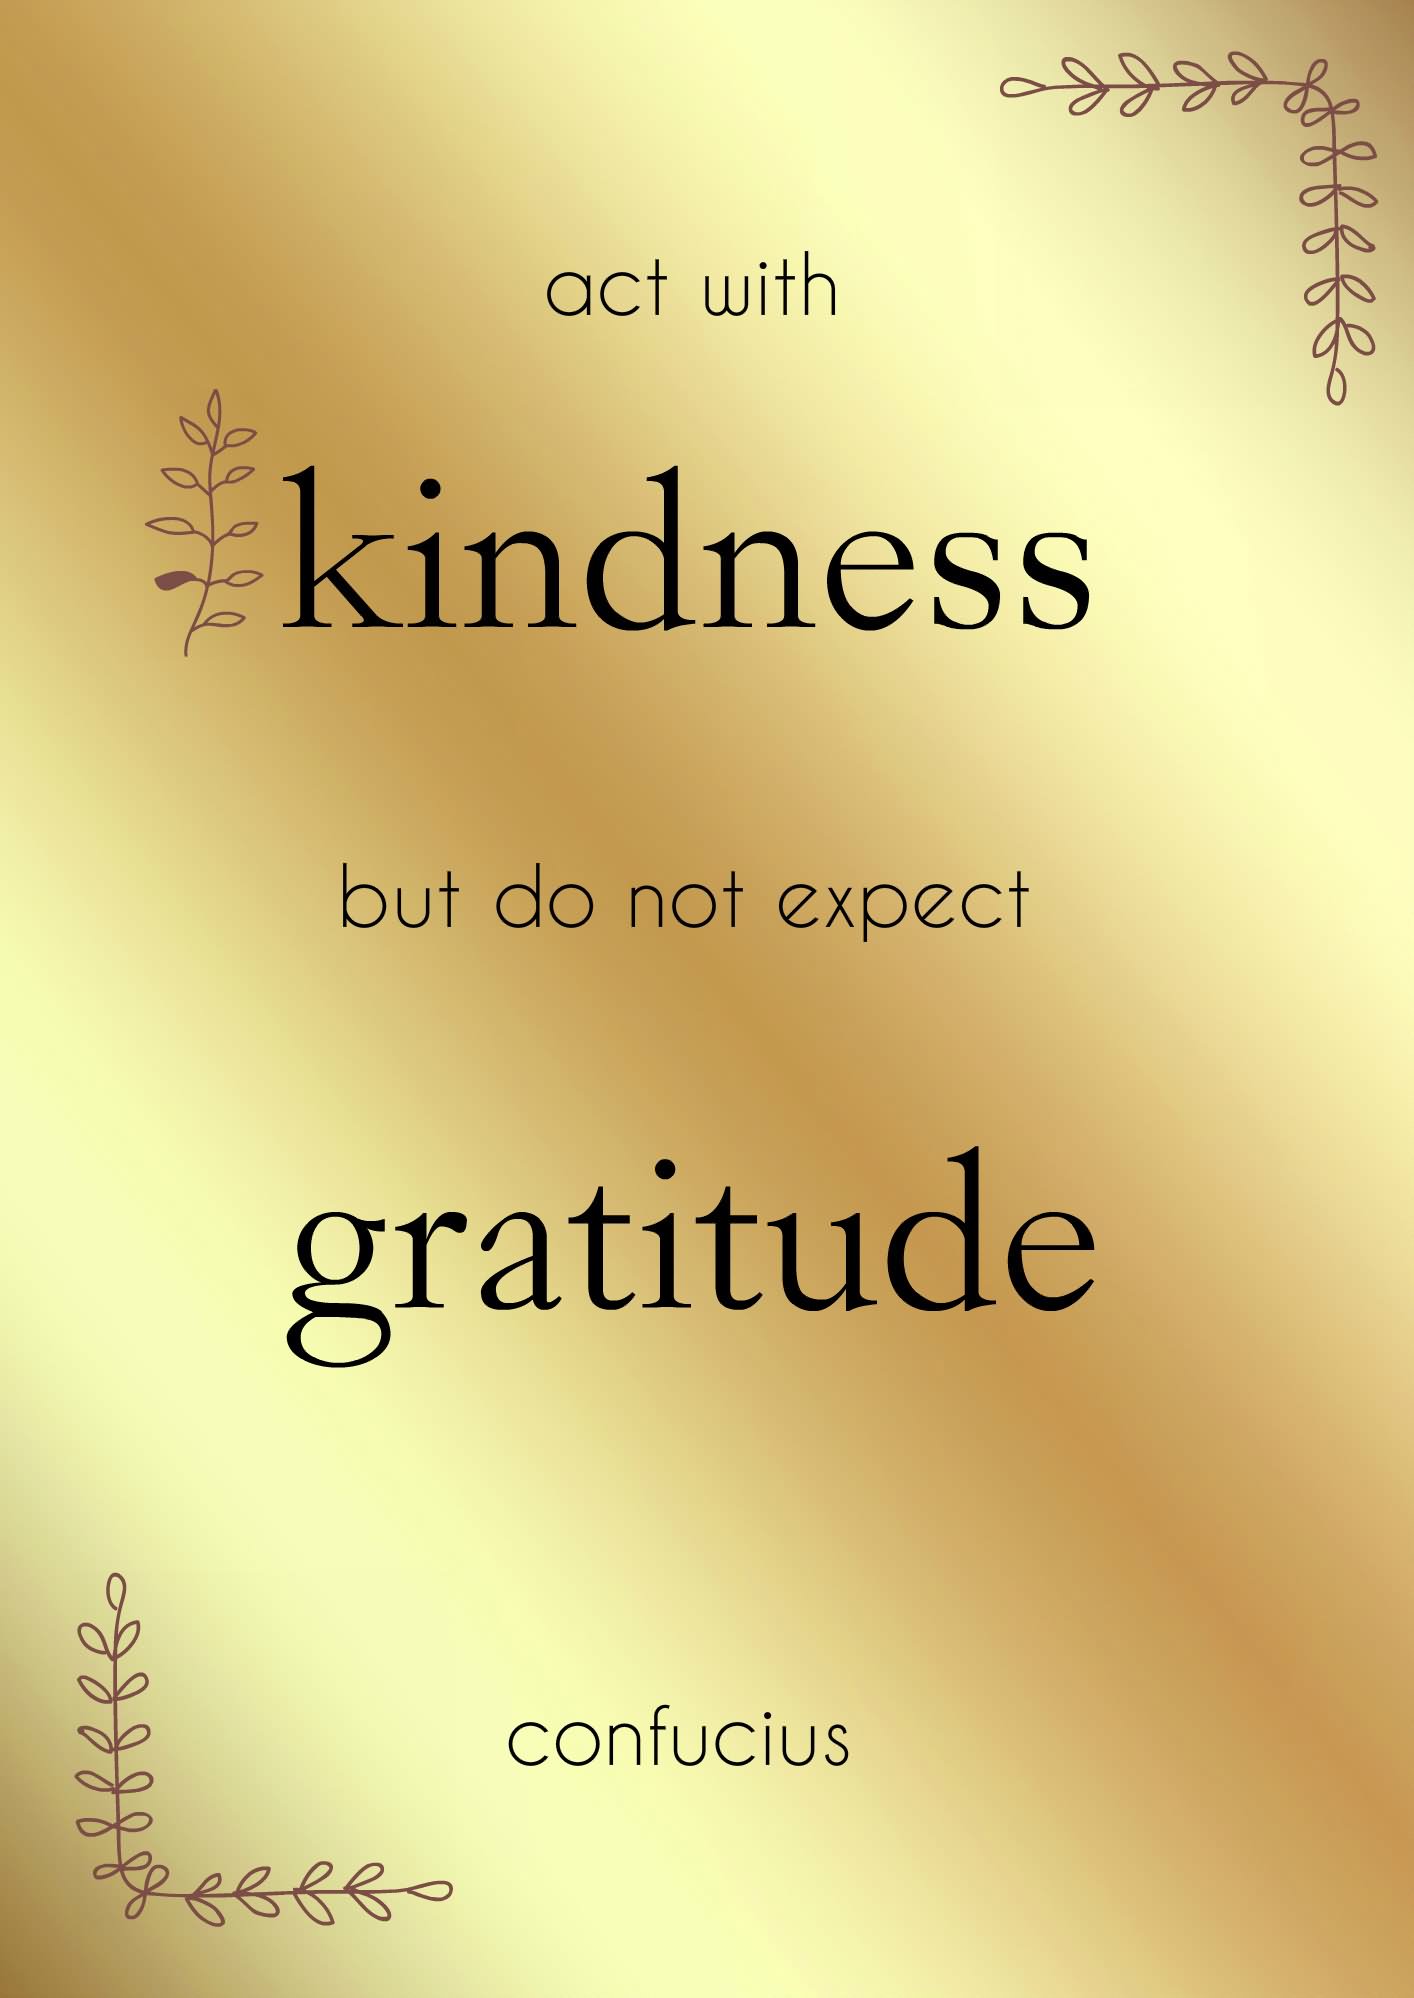 Act with kindness but do not expect gratitude - Confucius